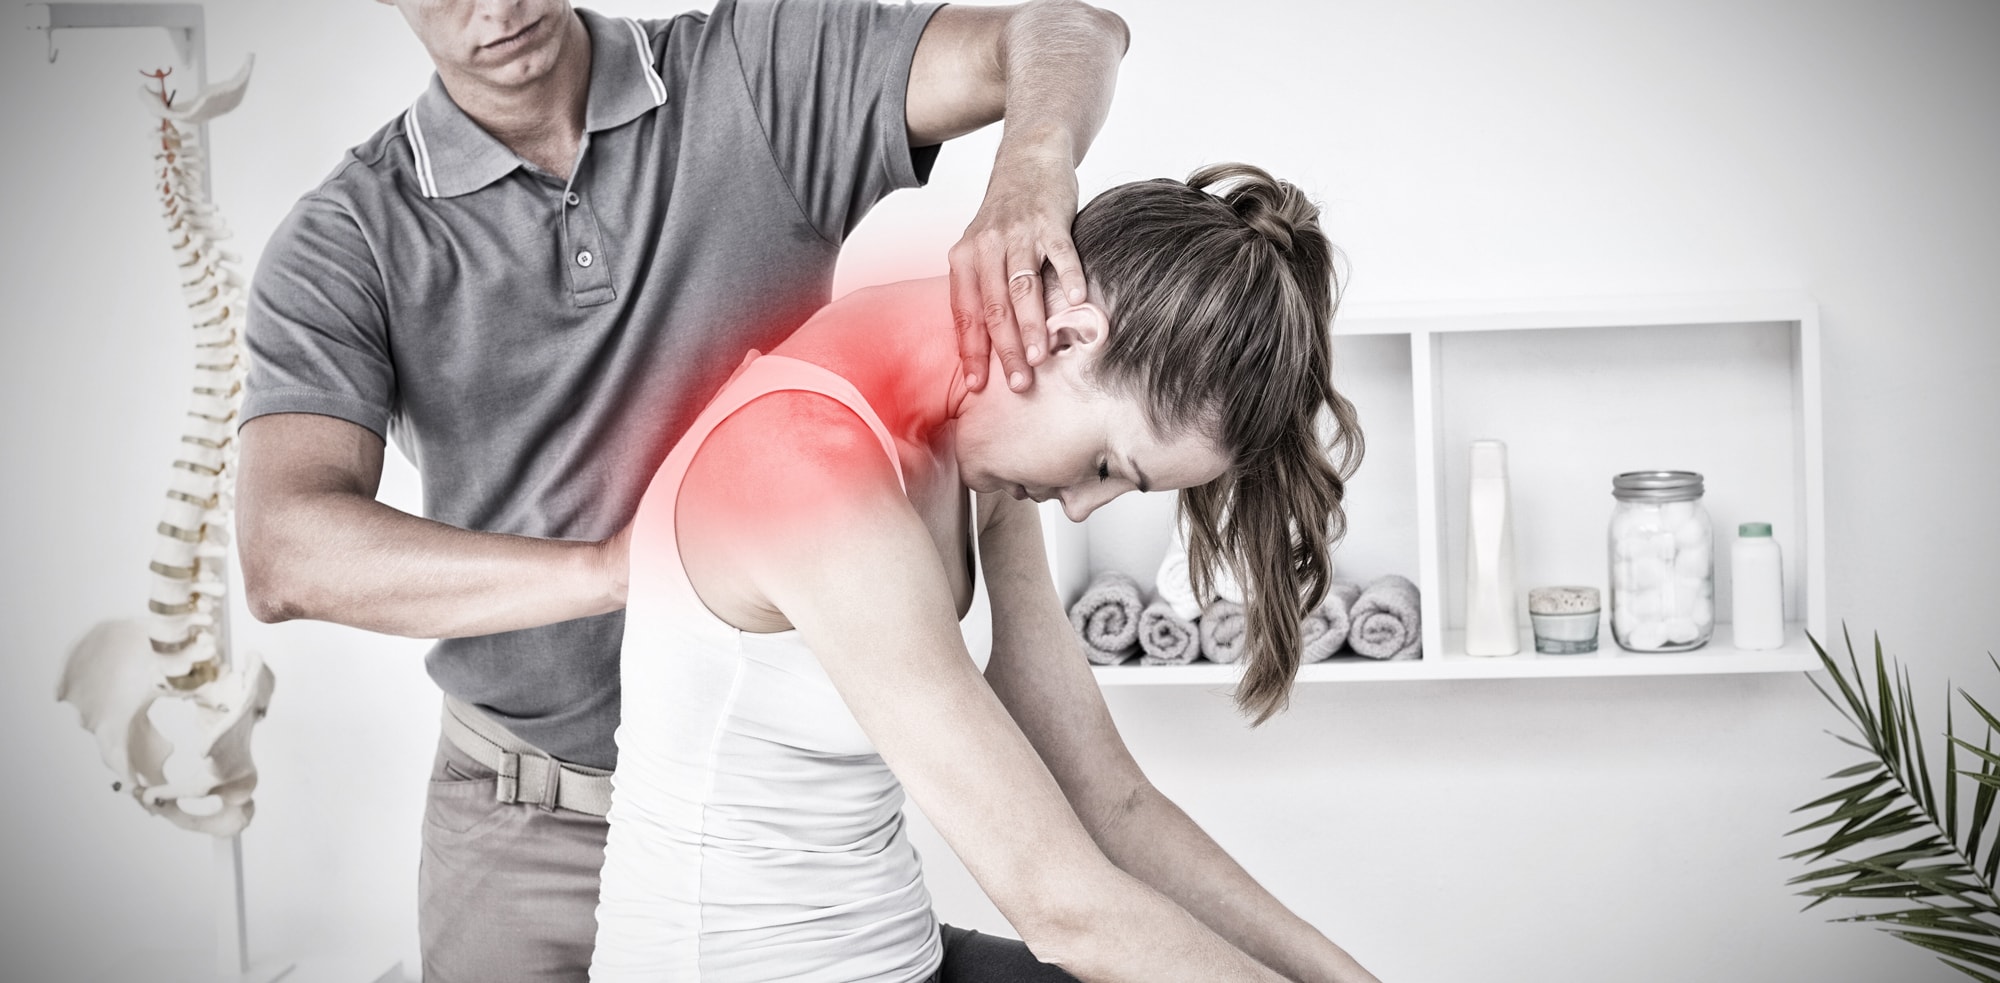 Are you suffering with neck pain due to bad posture or an injury?